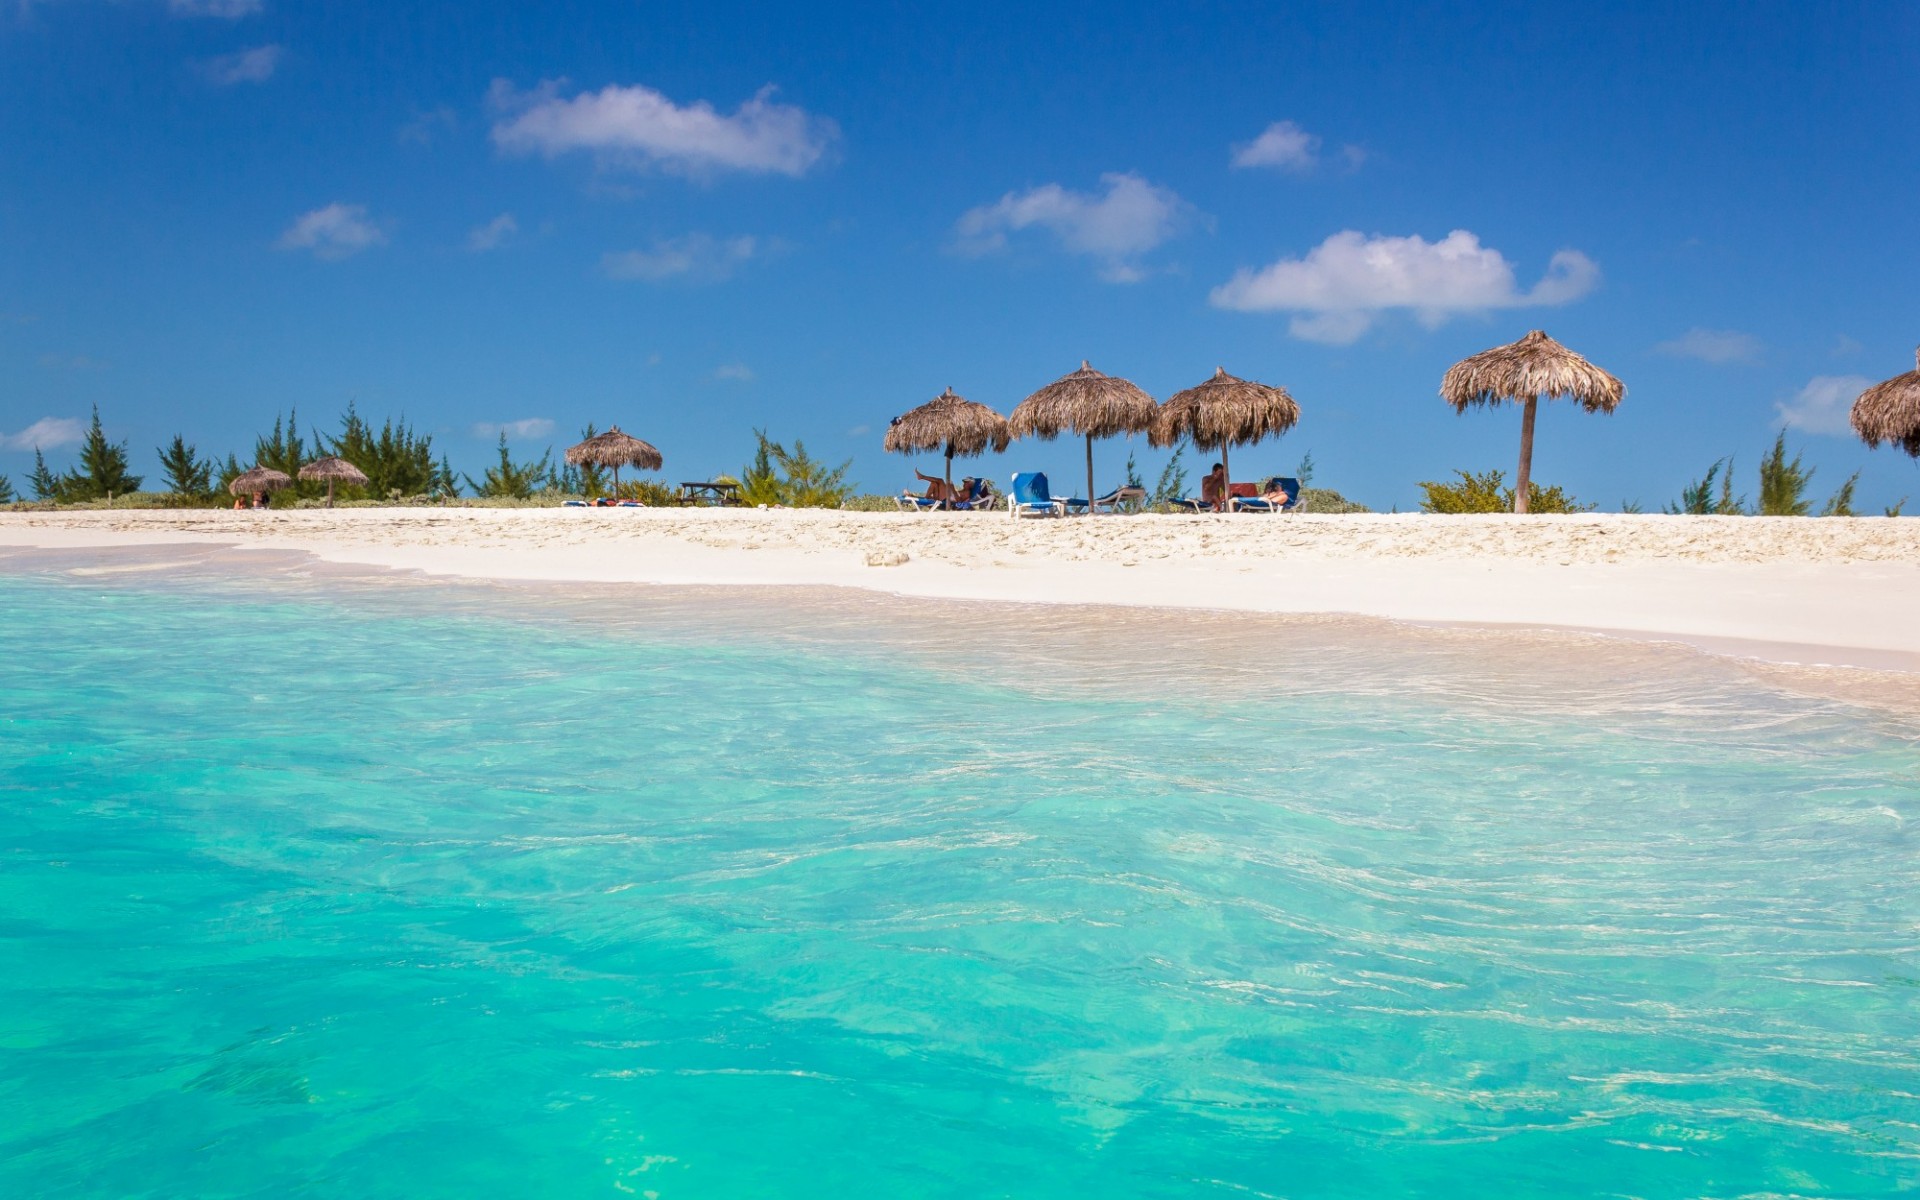 Cuban beach with white sands, turquoise waters and blue skies with umbrellas in the distance